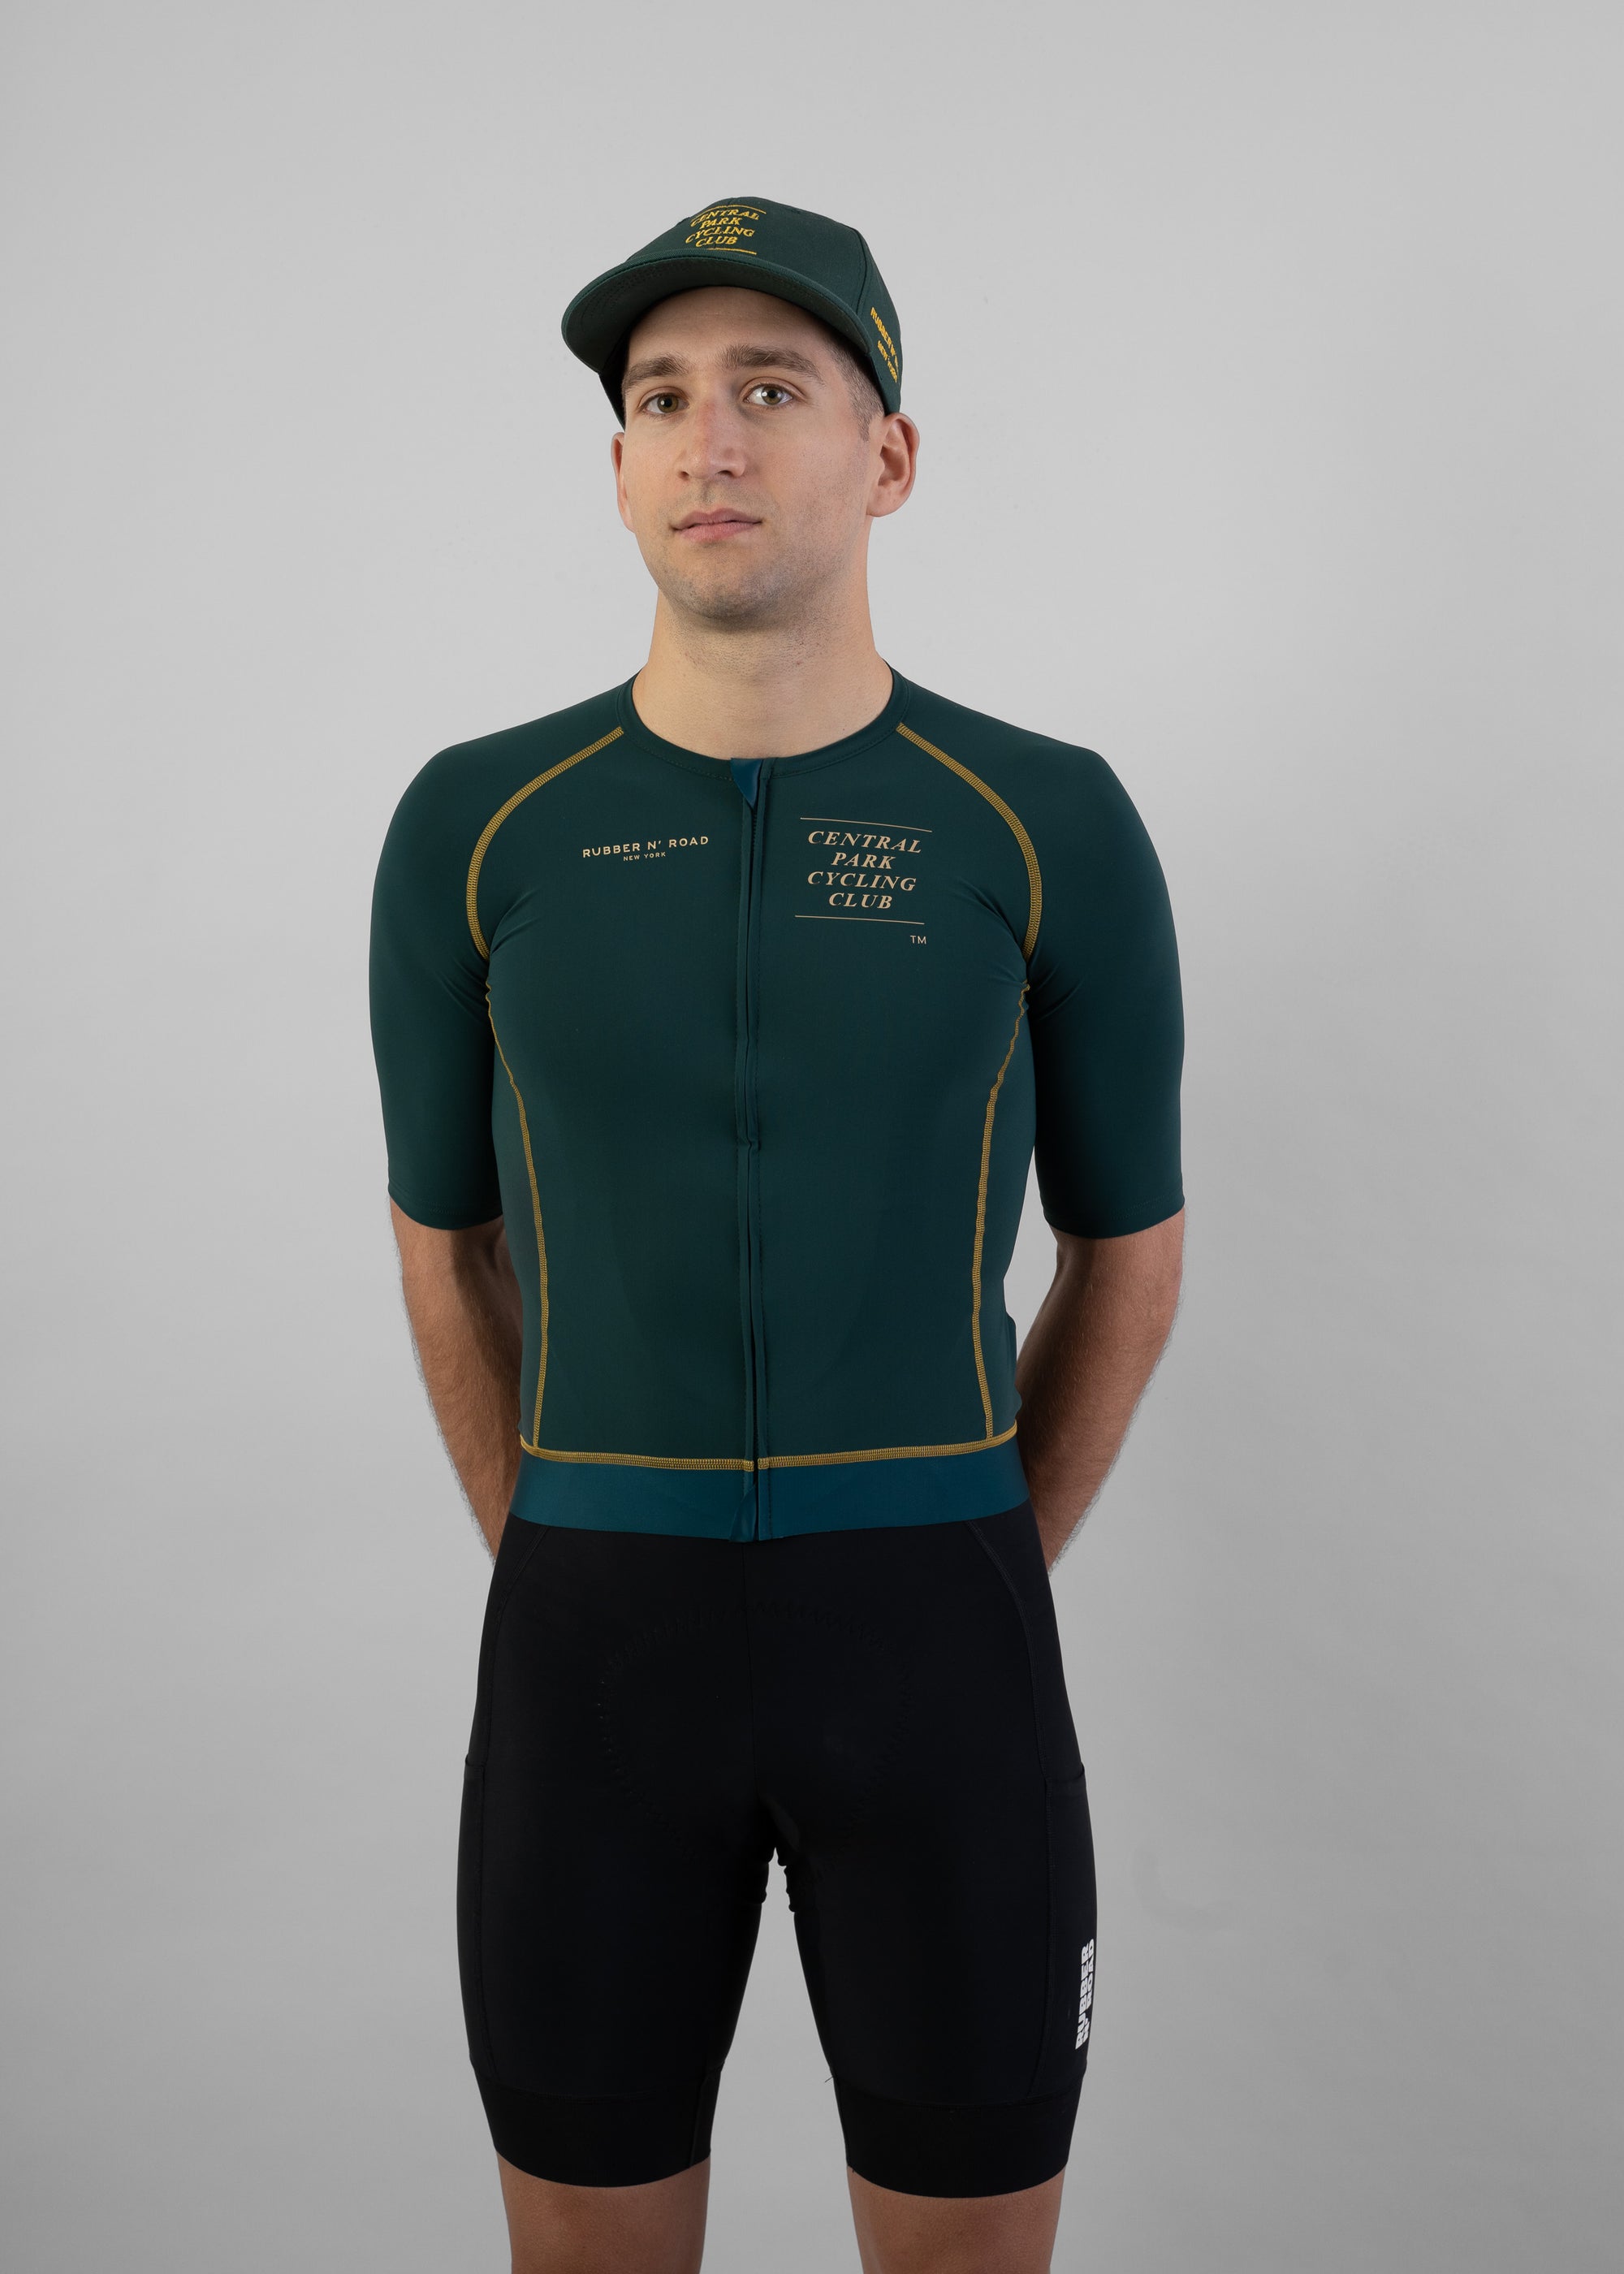 Central Park Cycling Club™ Jersey